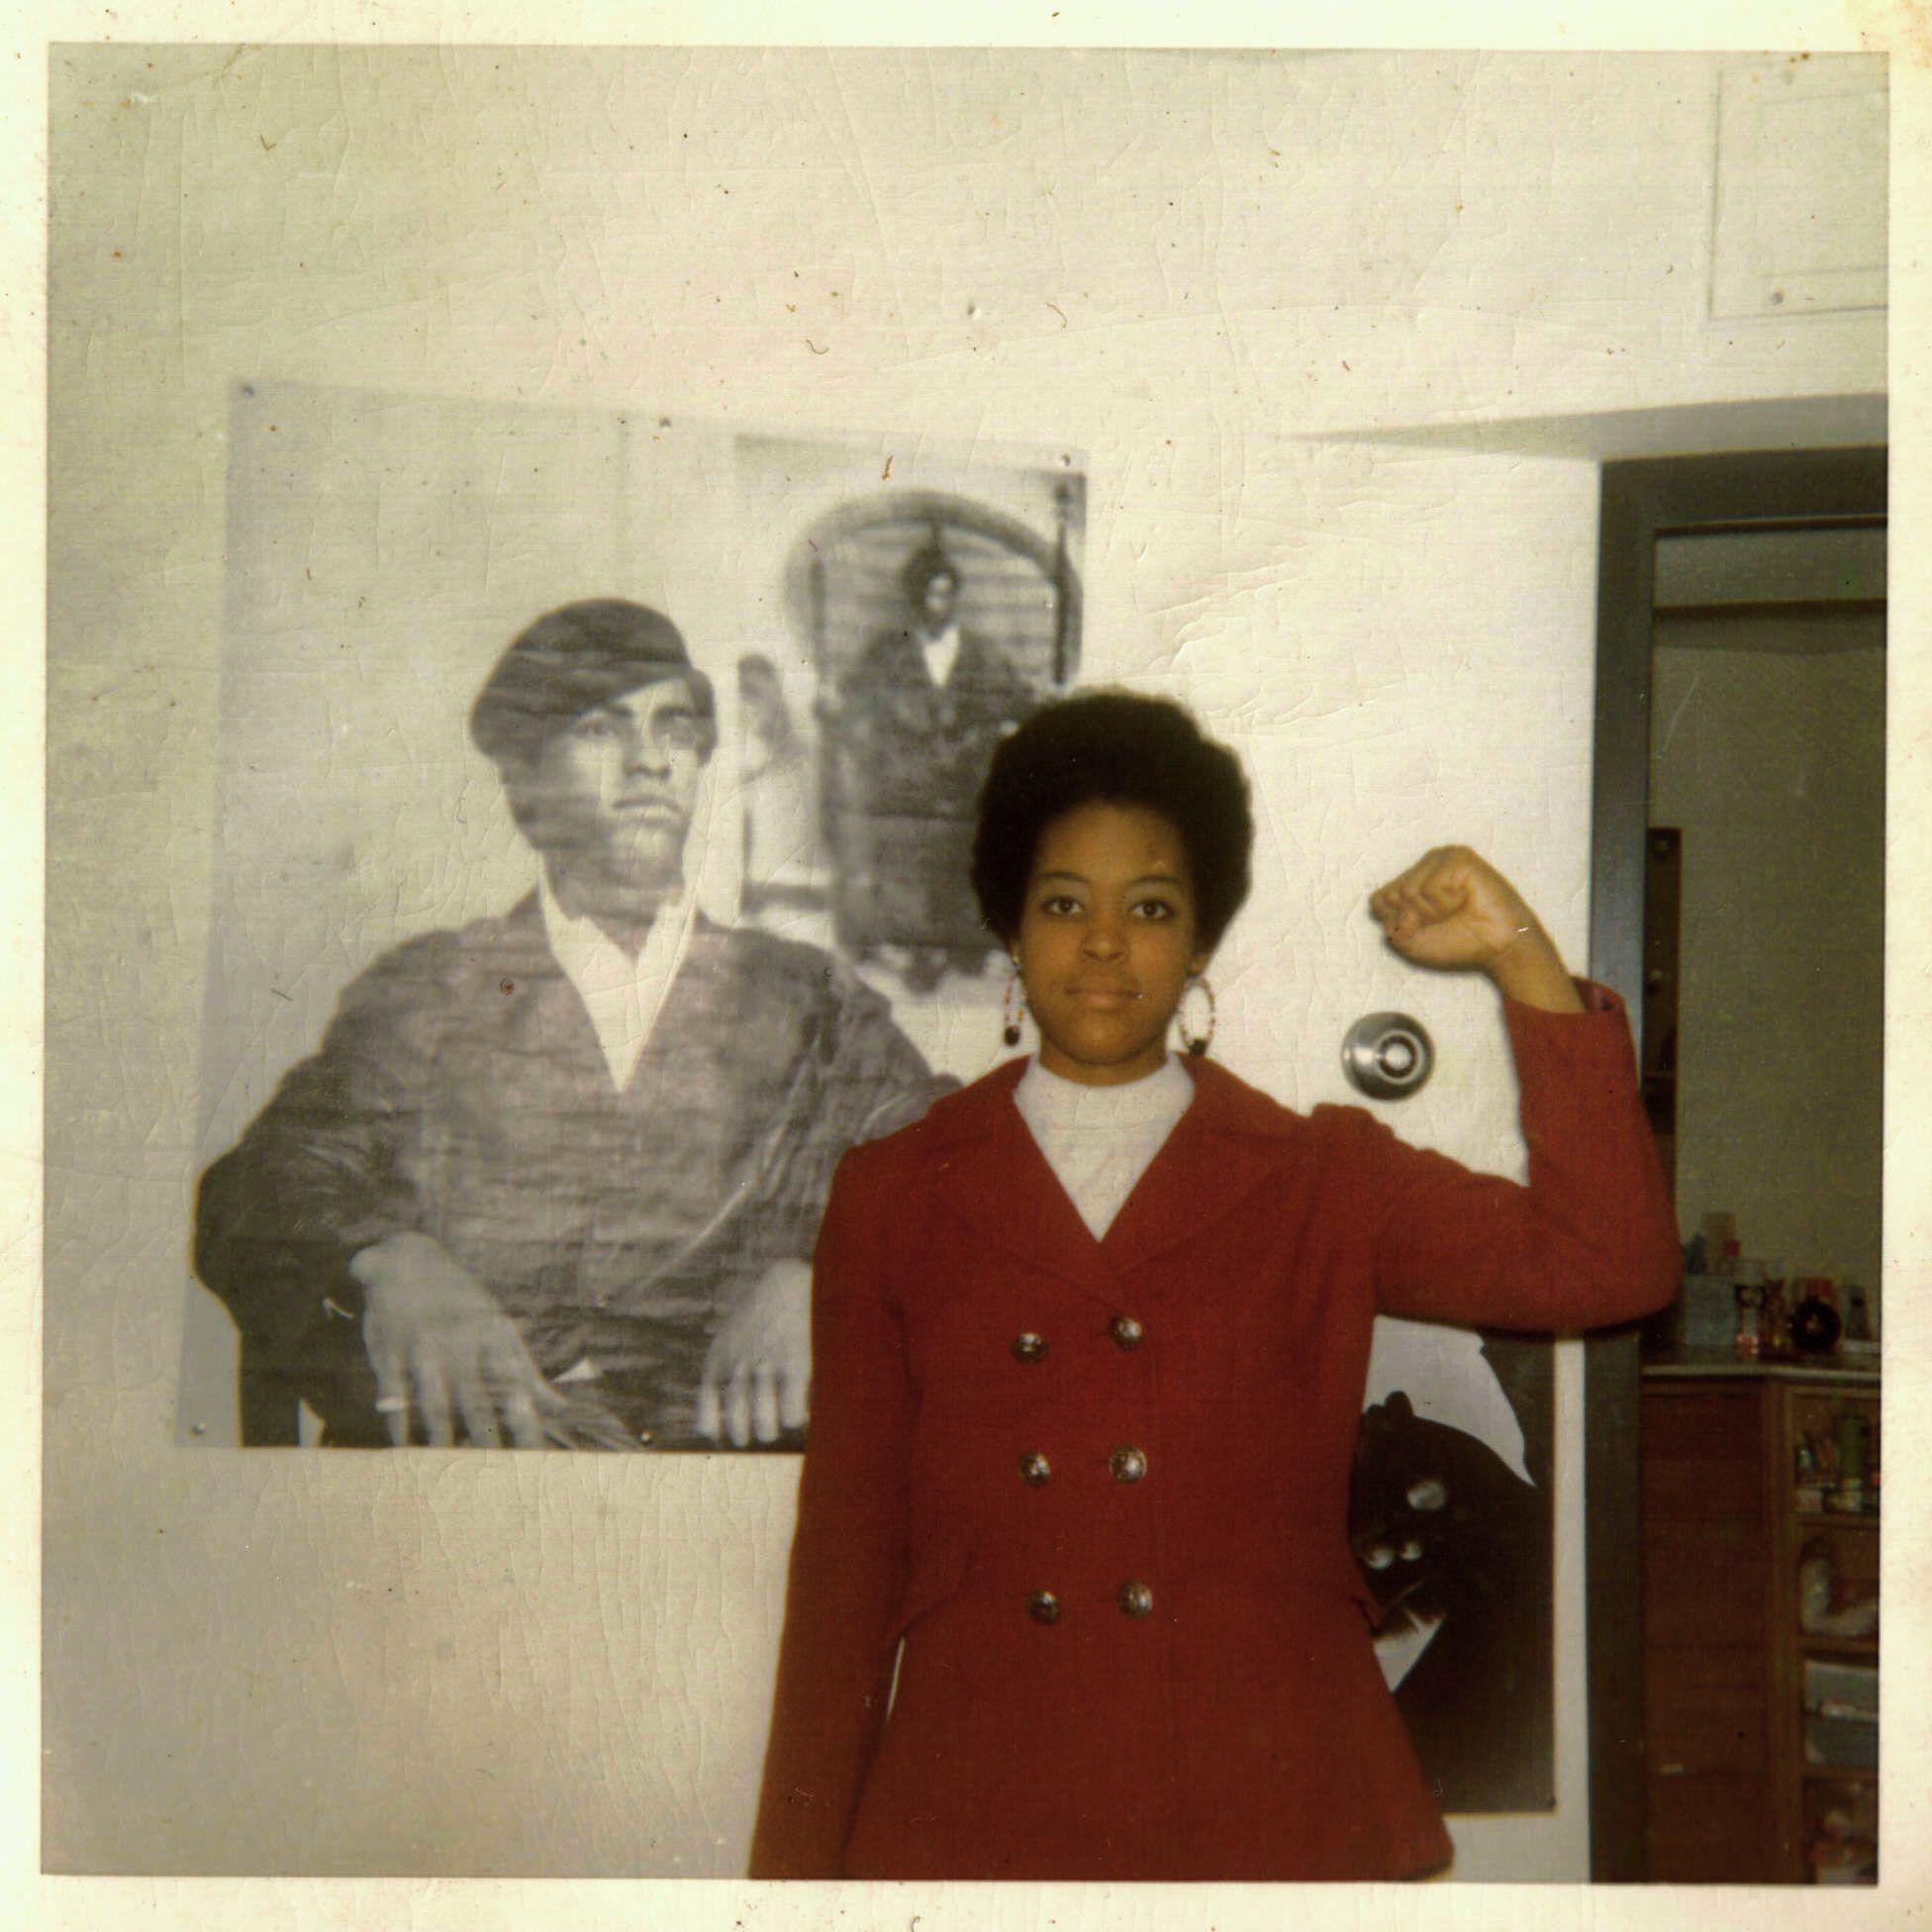 Photo of Amatul Haqq in Columbus, Ohio in 1969. She was a member of the Black Panther Party (Umi's Archive)